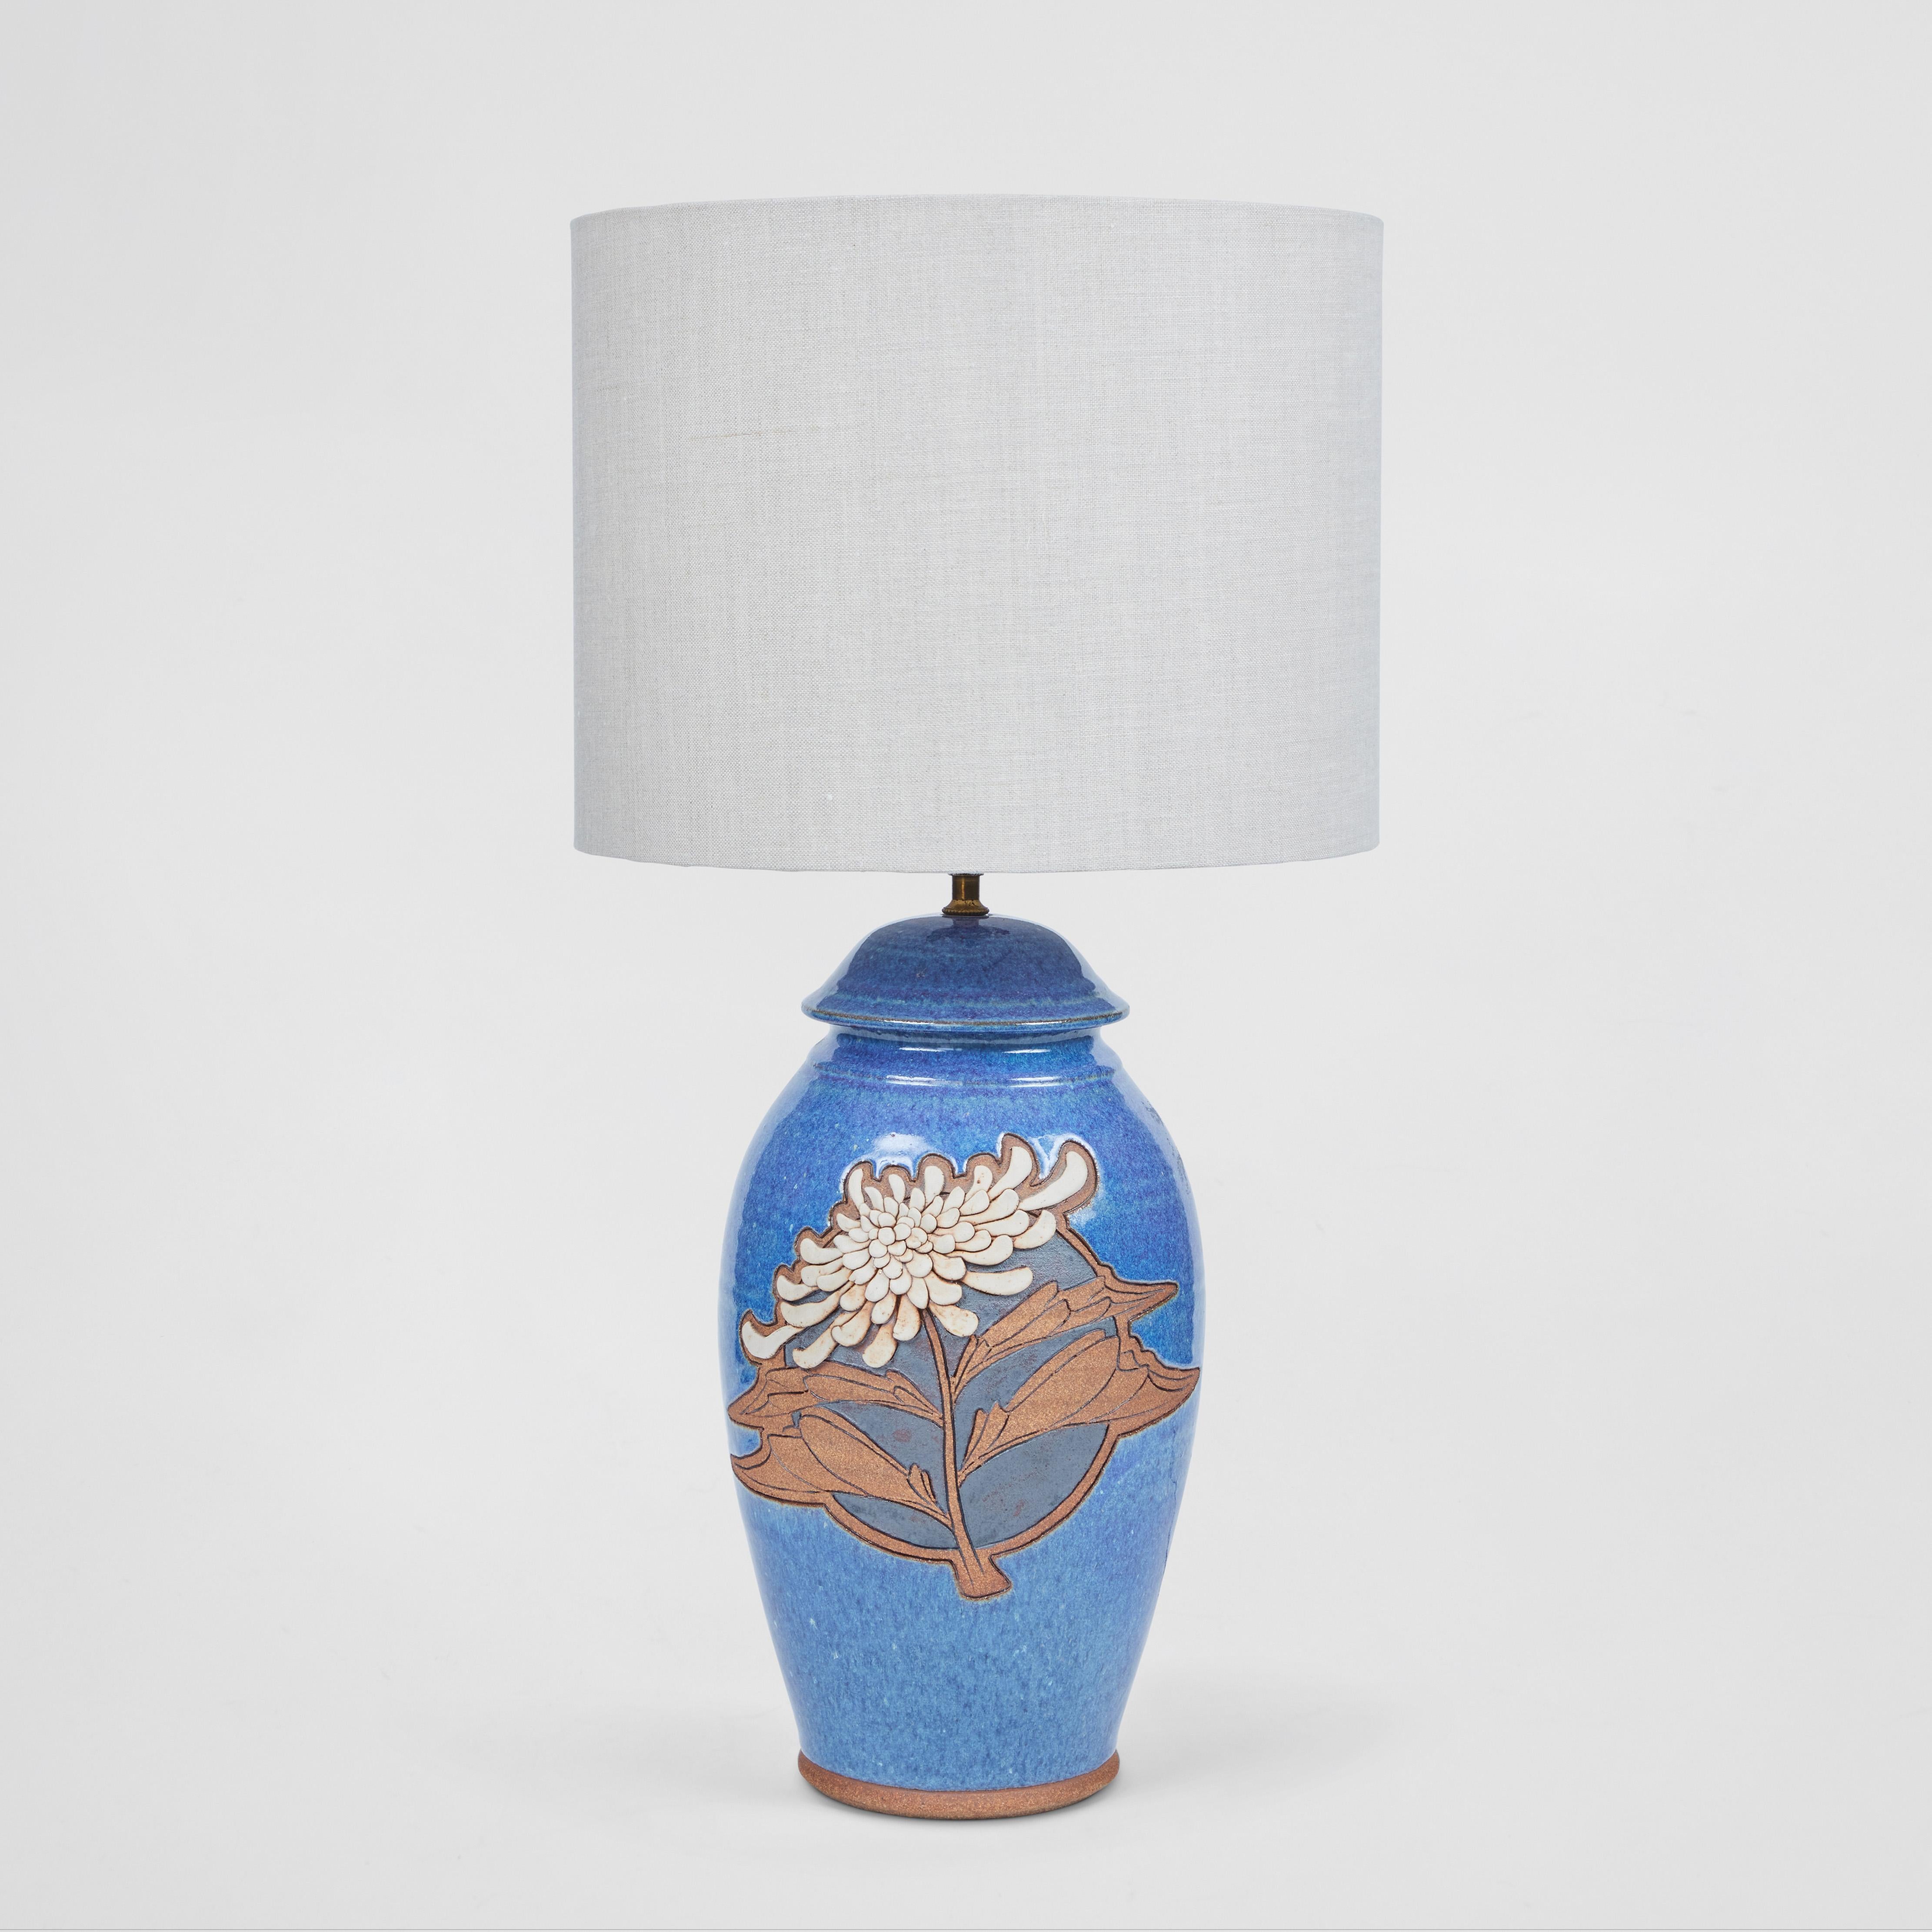 This is an easy way to add a little color to your room. We love this vintage studio pottery lamp with a gorgeous shade of blue glaze and intricate dimensional chrysanthemum flower design. It has been newly rewired, has a new custom linen shade and